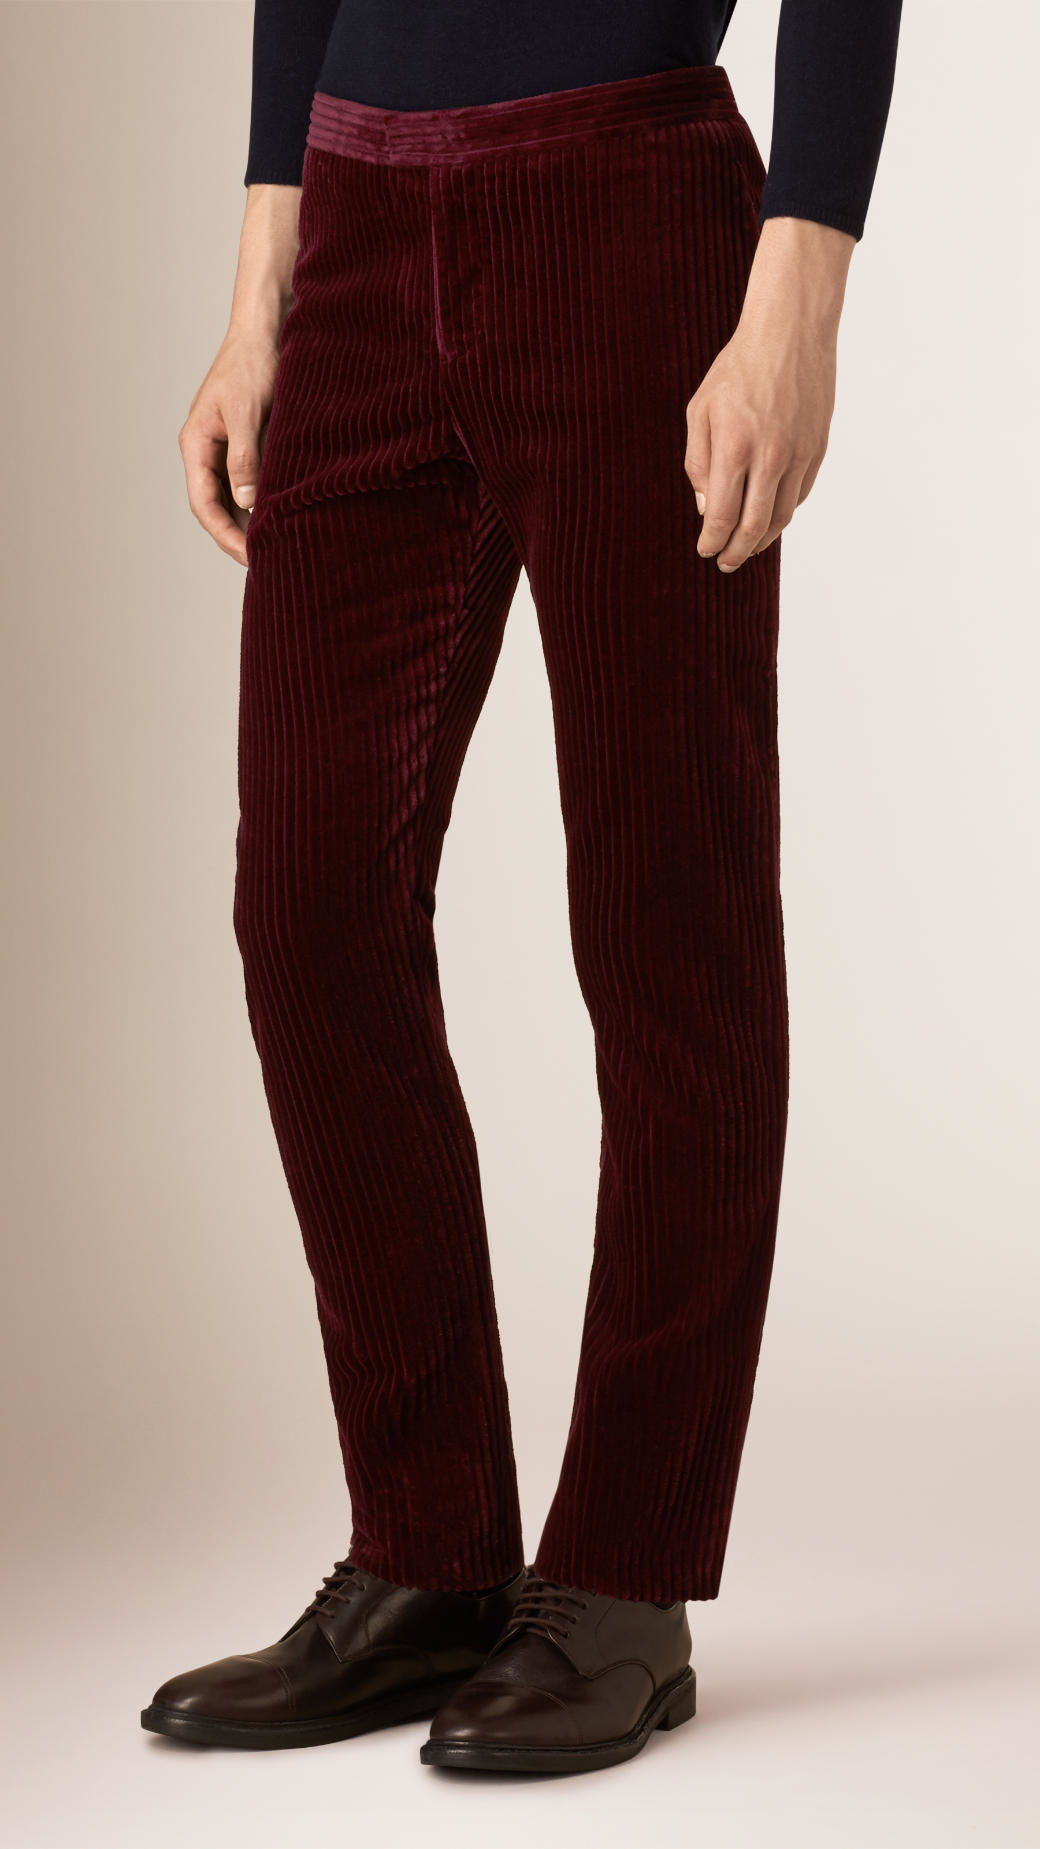 Lyst - Burberry Straight Fit Corduroy Trousers in Purple for Men